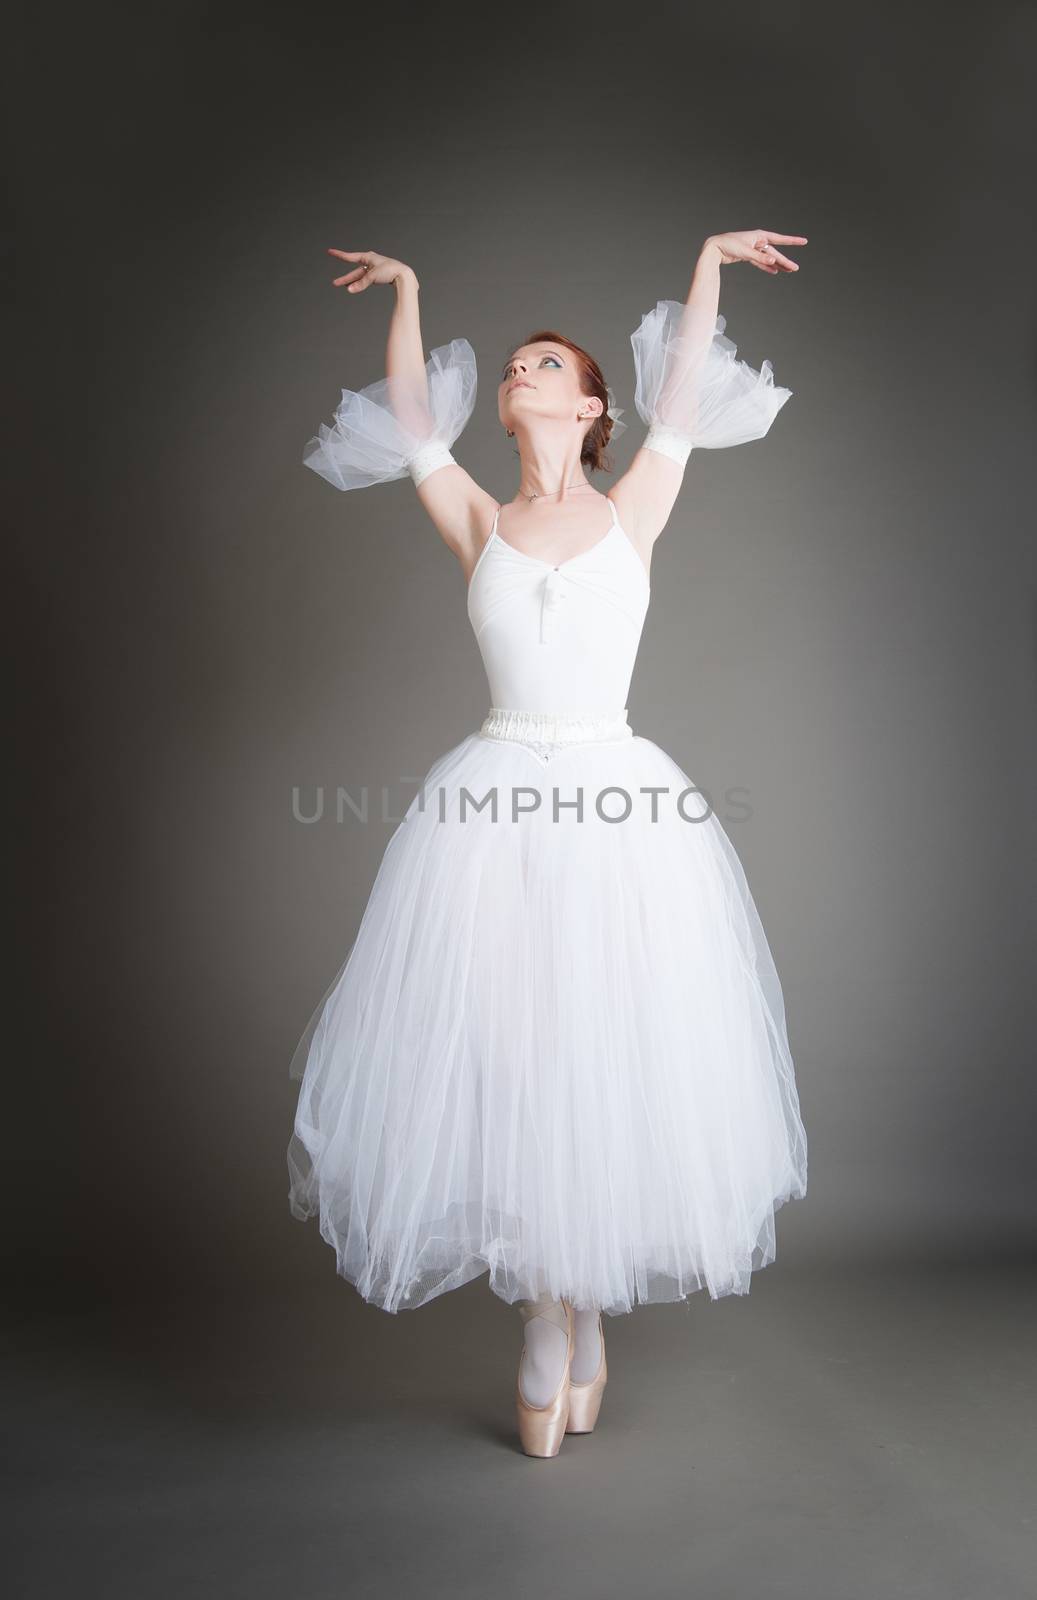 dancer in the white tutu dancing on a grey background